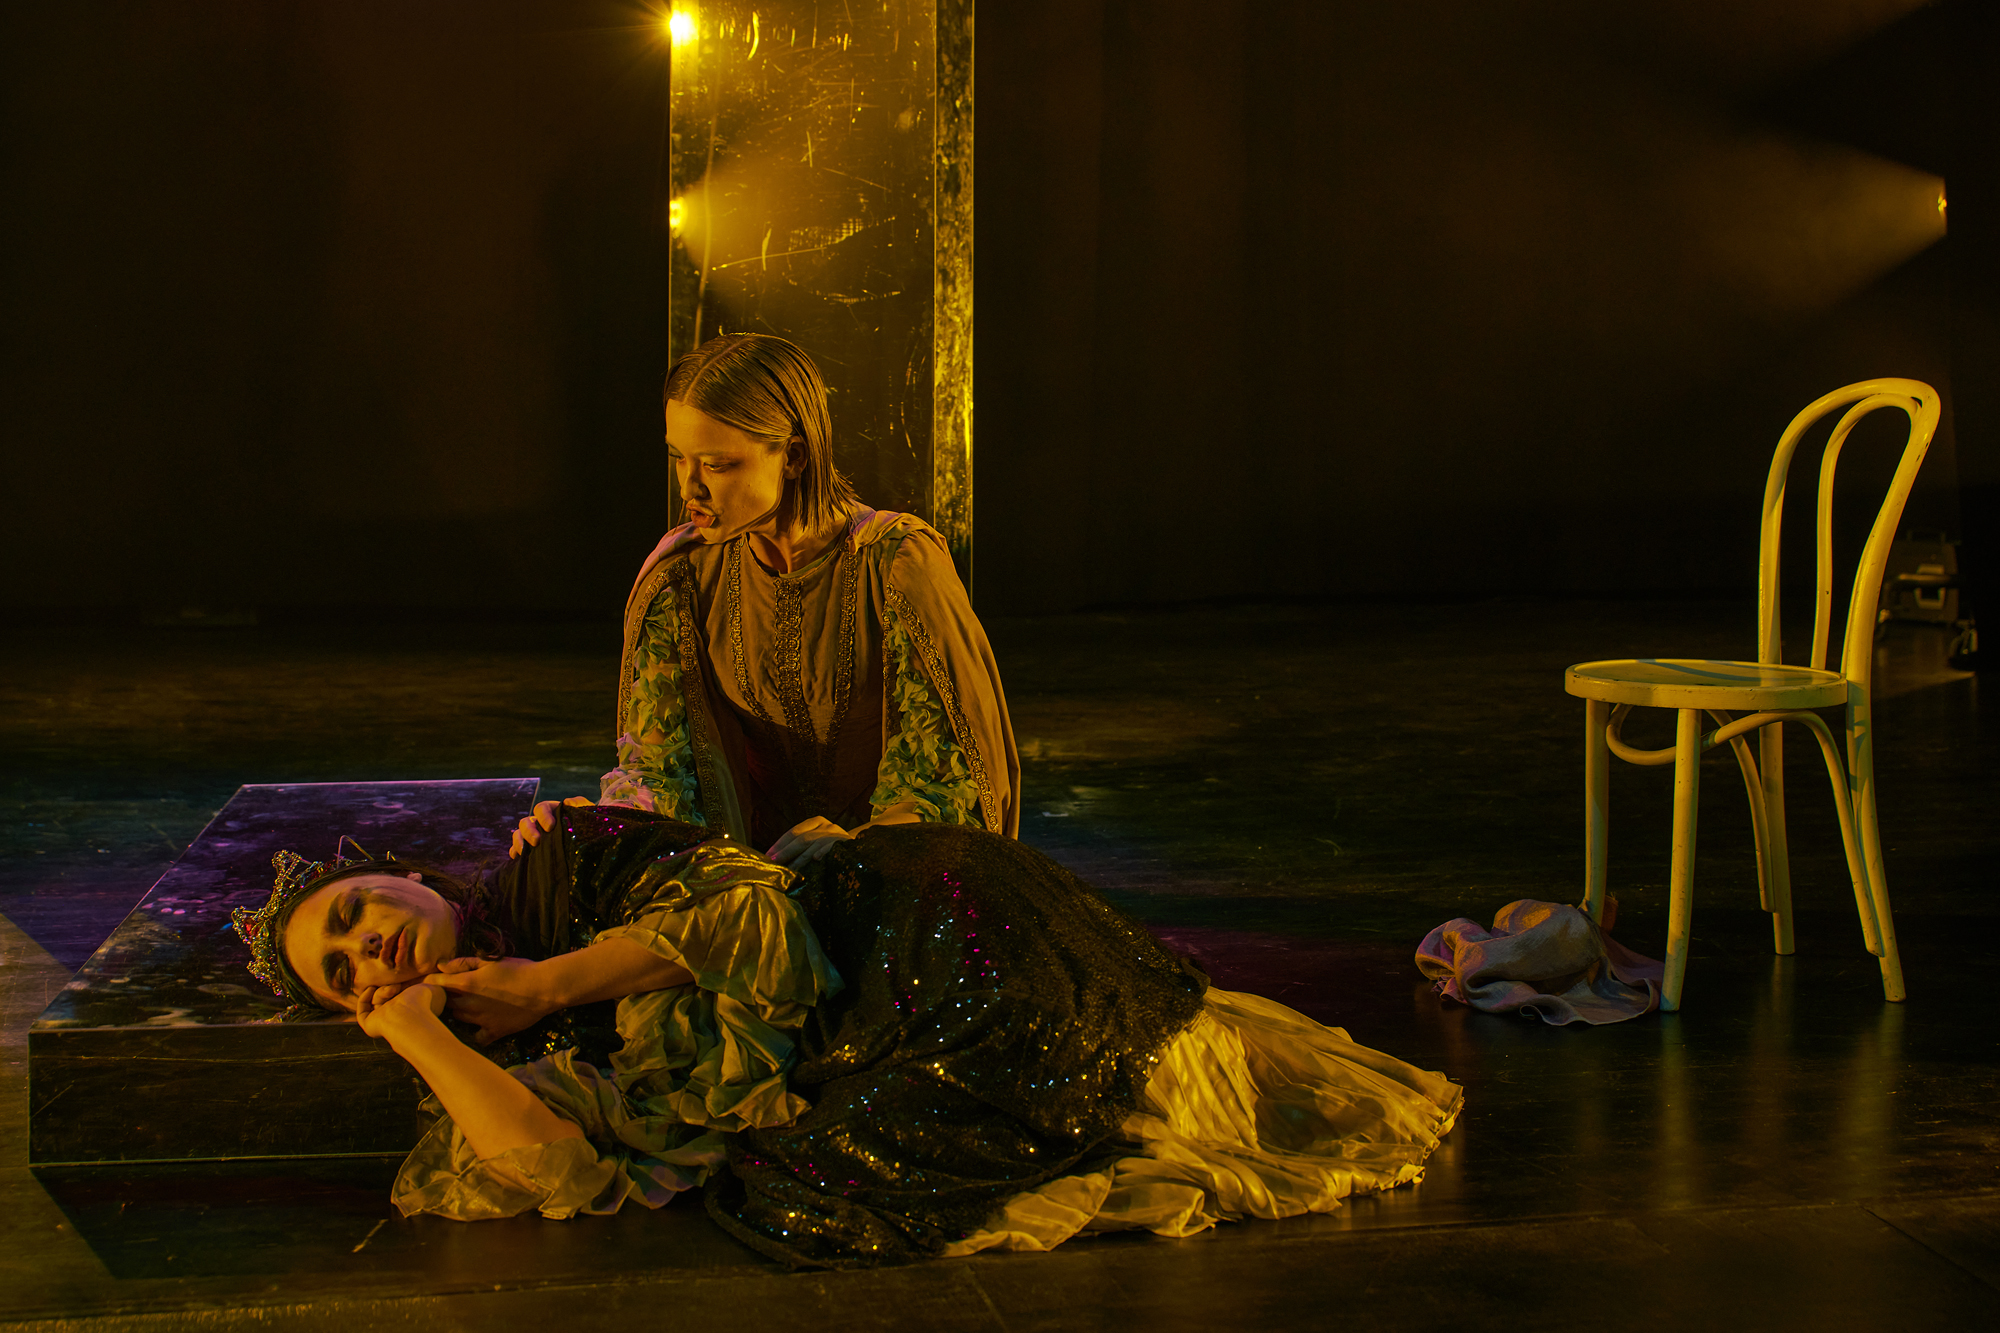 A photo of Clara and Tintomara. Clara is laying on the floor with her head resting on a laying down mirror. Tintomara is sitting behind her with her hand on her shoulder. Clara is wearing the crown, her eyes closed, while Tintomara sings to her. They are lit in gold, behind them are two more mirrors, standing up.